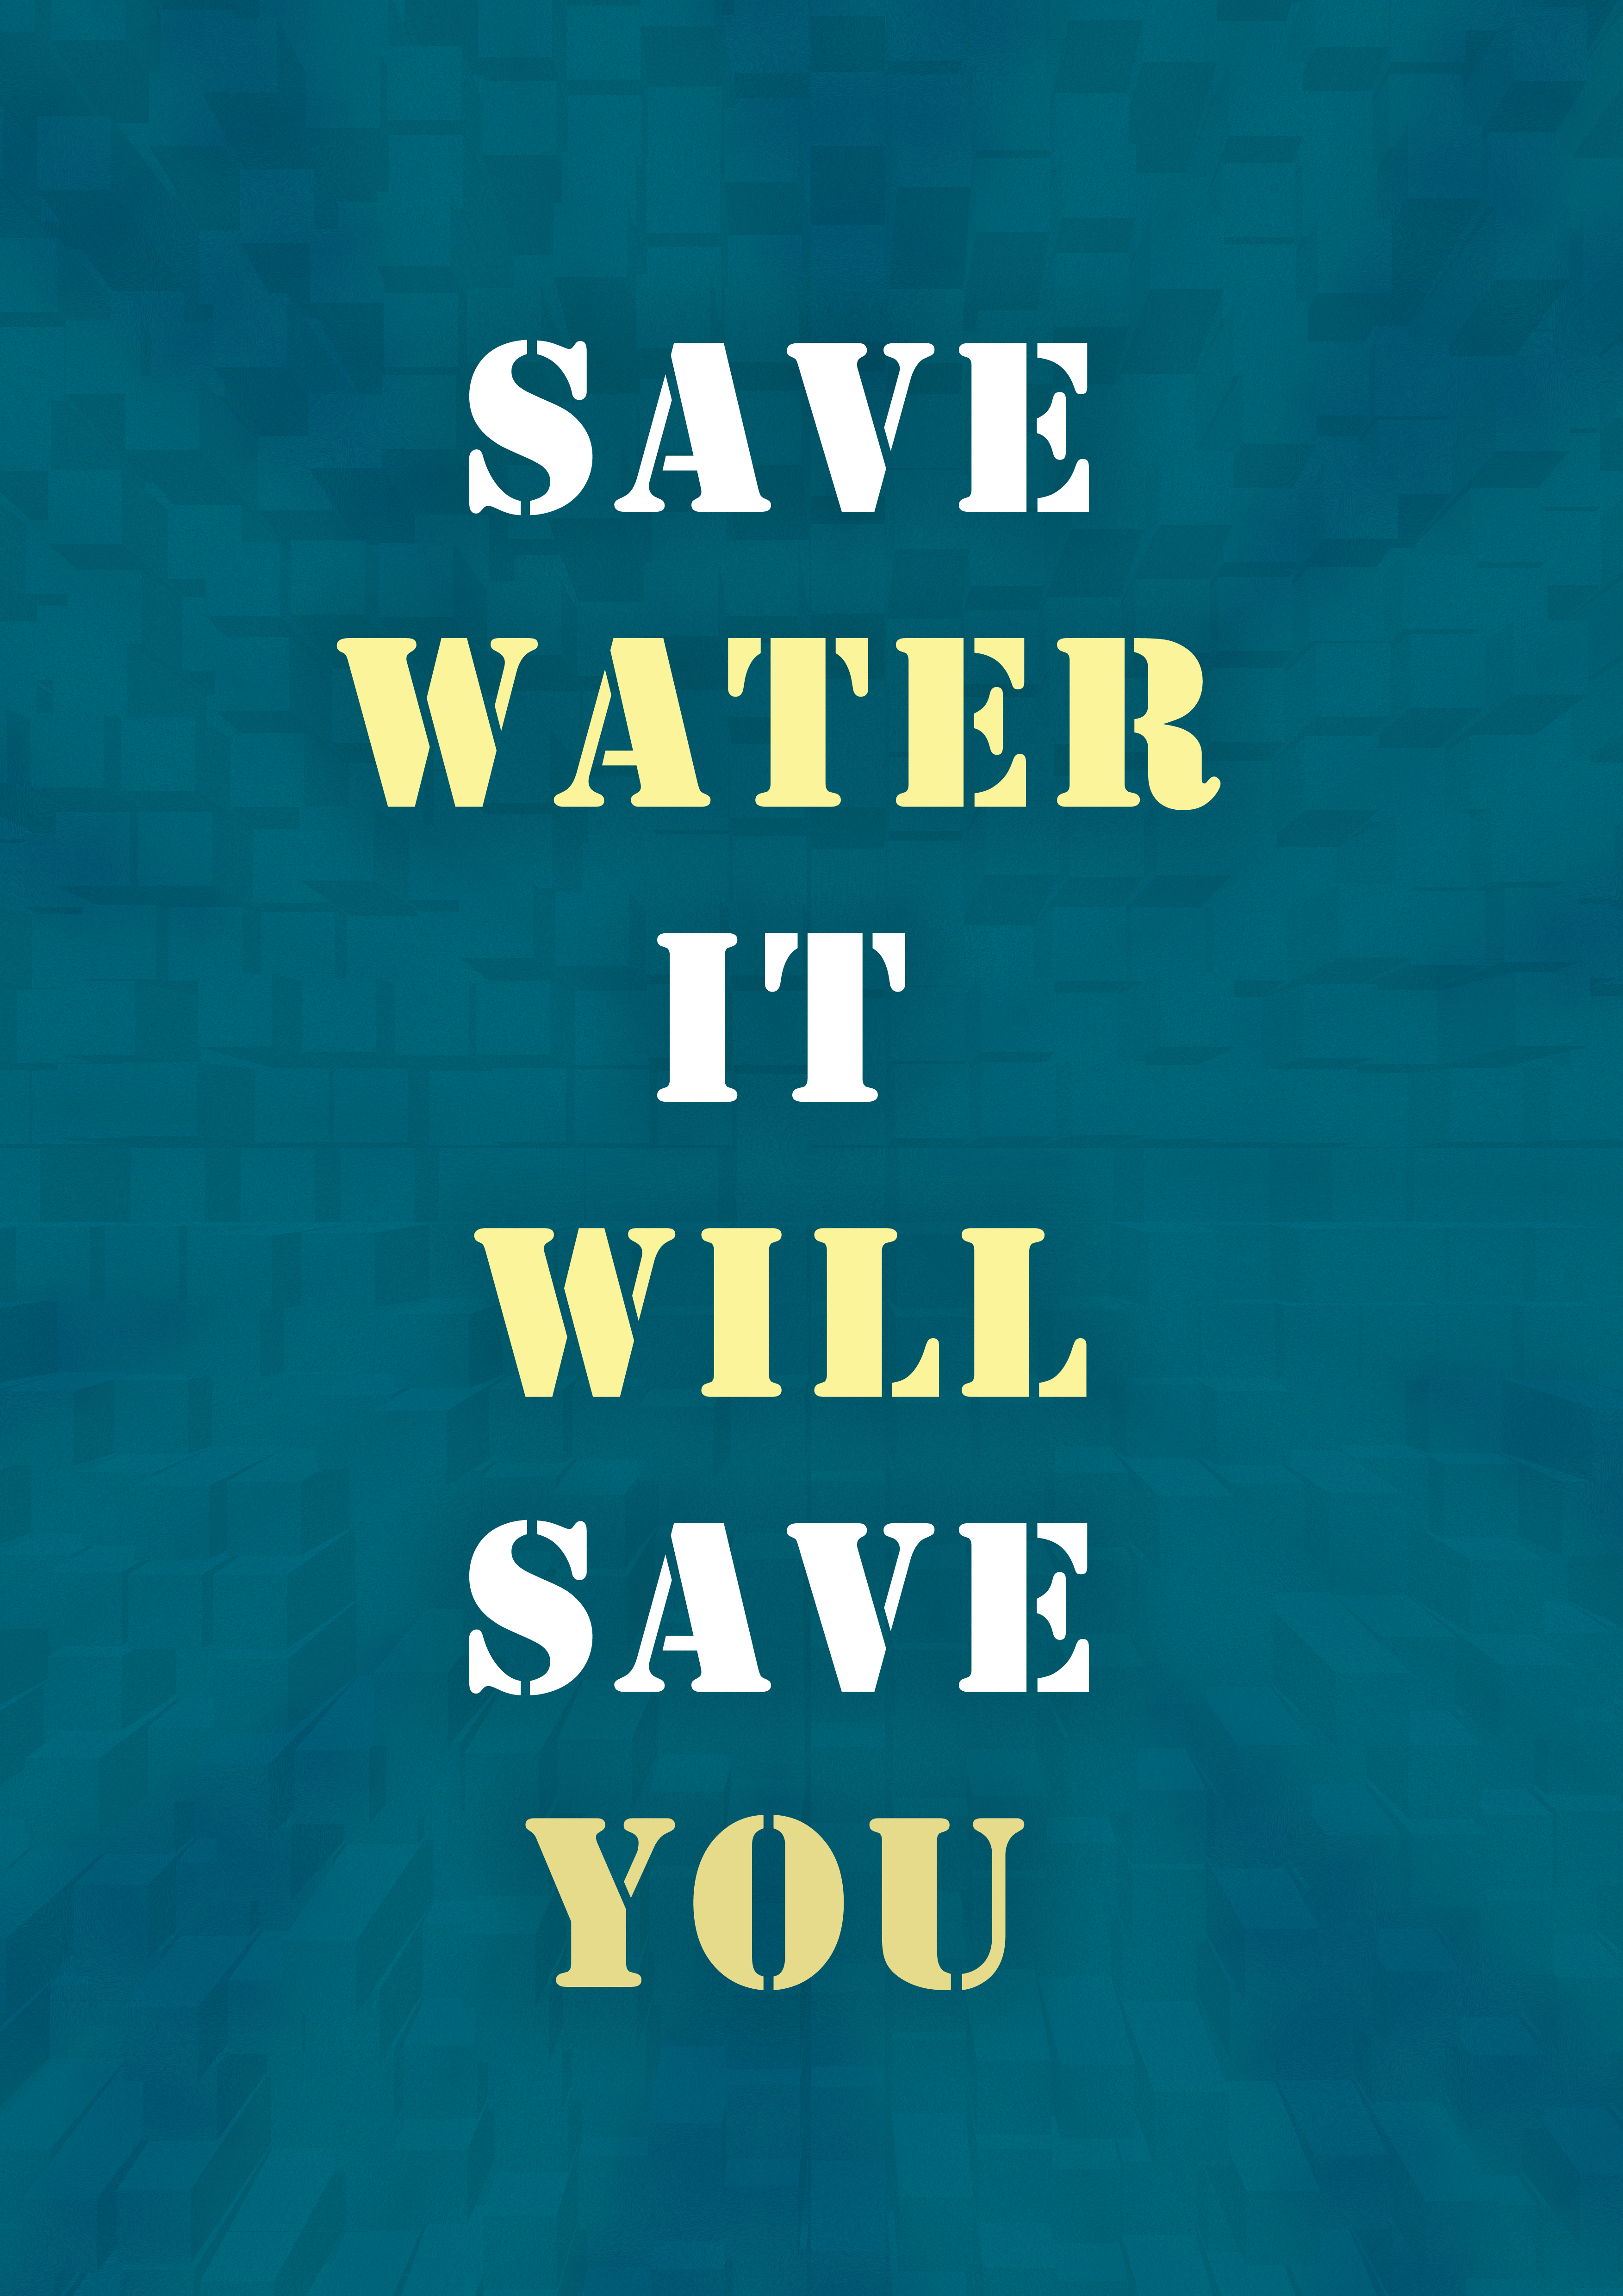 Save water poster a3 size